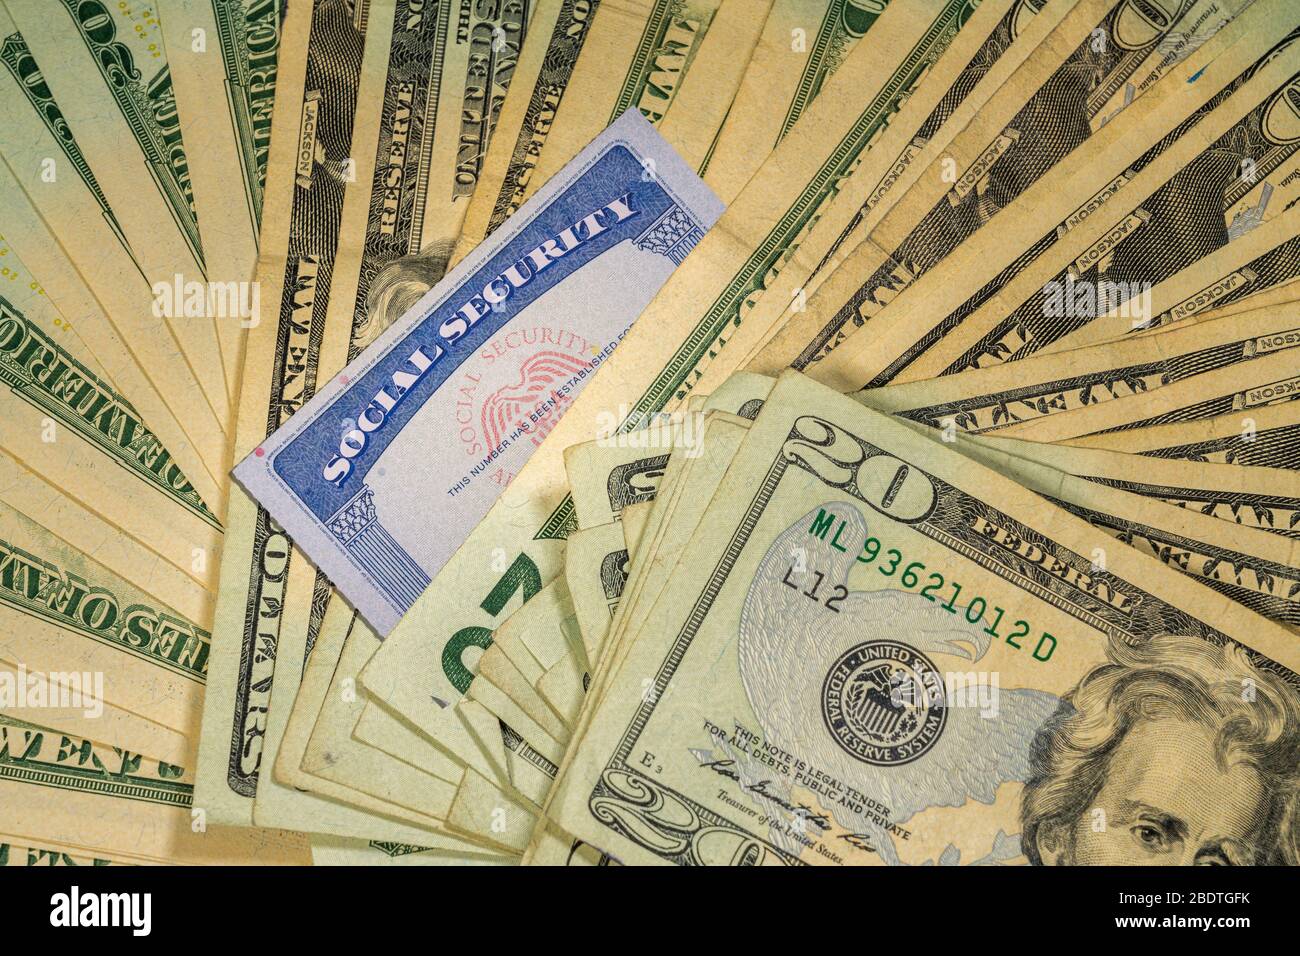 Thousands of US dollars laid out in a flat background perspective with the focus on a social security card Stock Photo